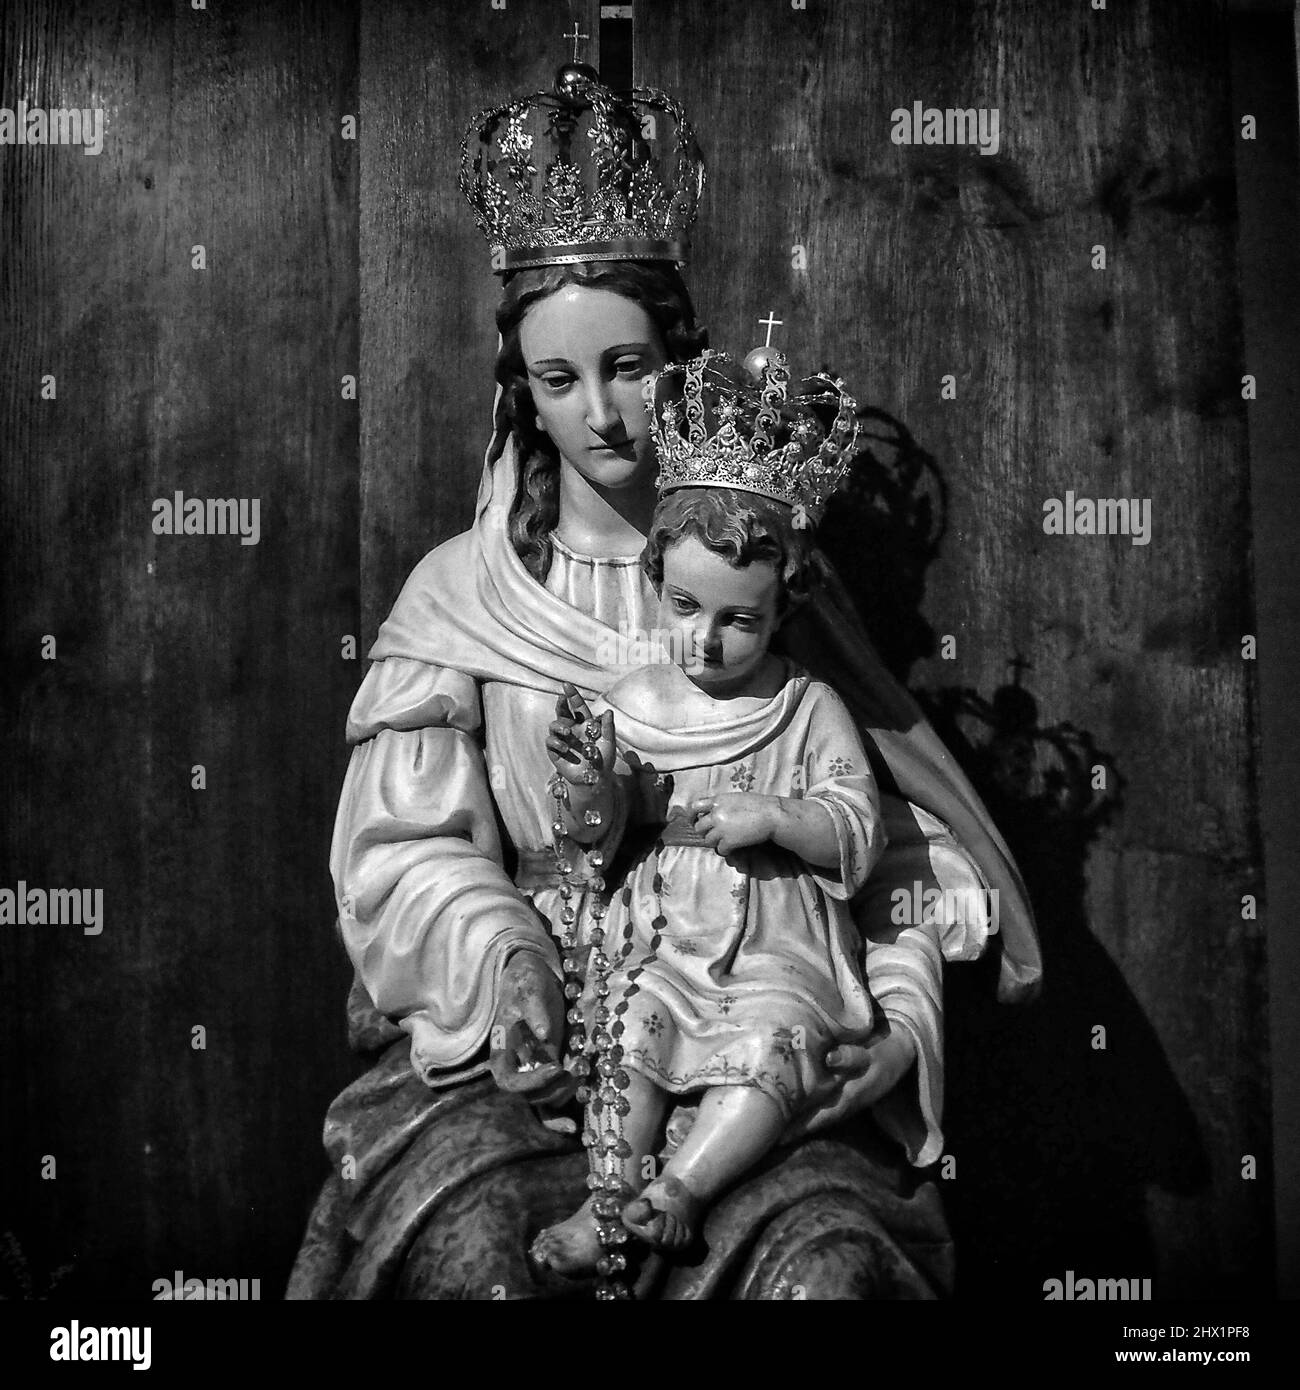 Virgin Mary with the Baby Jesus statue in a catholic church - Black and white religious fine art photography Stock Photo